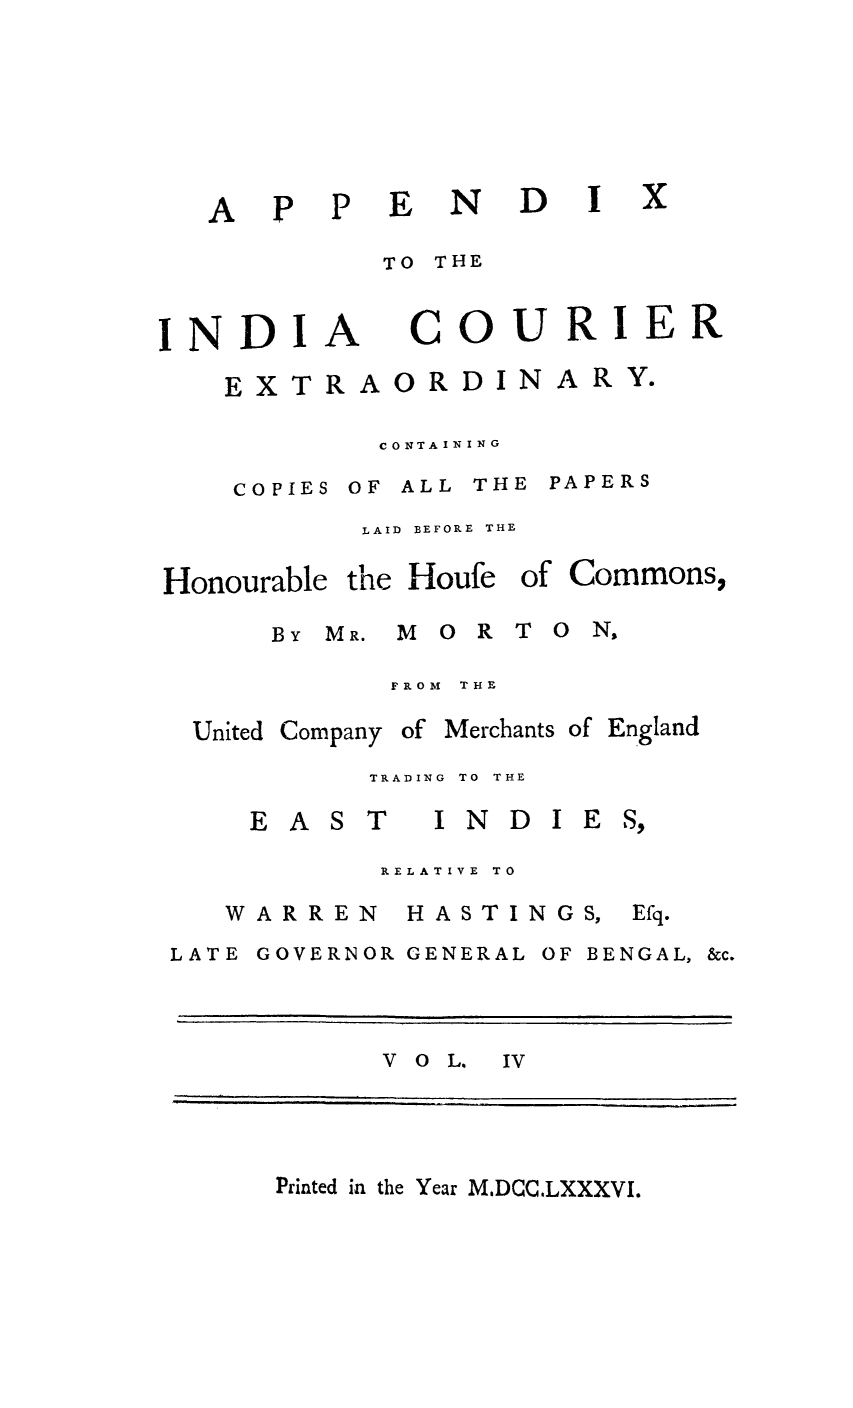 handle is hein.trials/indcour0004 and id is 1 raw text is: P P

TO THE

INDI

A

COURIER

CONTAINING
COPIES OF ALL THE PAPERS
LAID  BEFORE THE

Honourable the Houfe
BY MR. M 0 R

of Commons,
T O NS

FROM THE

Company

of Merchants of England

TRADING  TO  THE

EAST

INDIES,

RELATIVE TO

WARREN

HASTINGS,

LATE GOVERNOR GENERAL OF BENGAL, &c.
V o L. IV

Printed in the Year MDCCLXXXVI.

A

ND I

EXTRAORDIN

ARY.

United

Efq.


